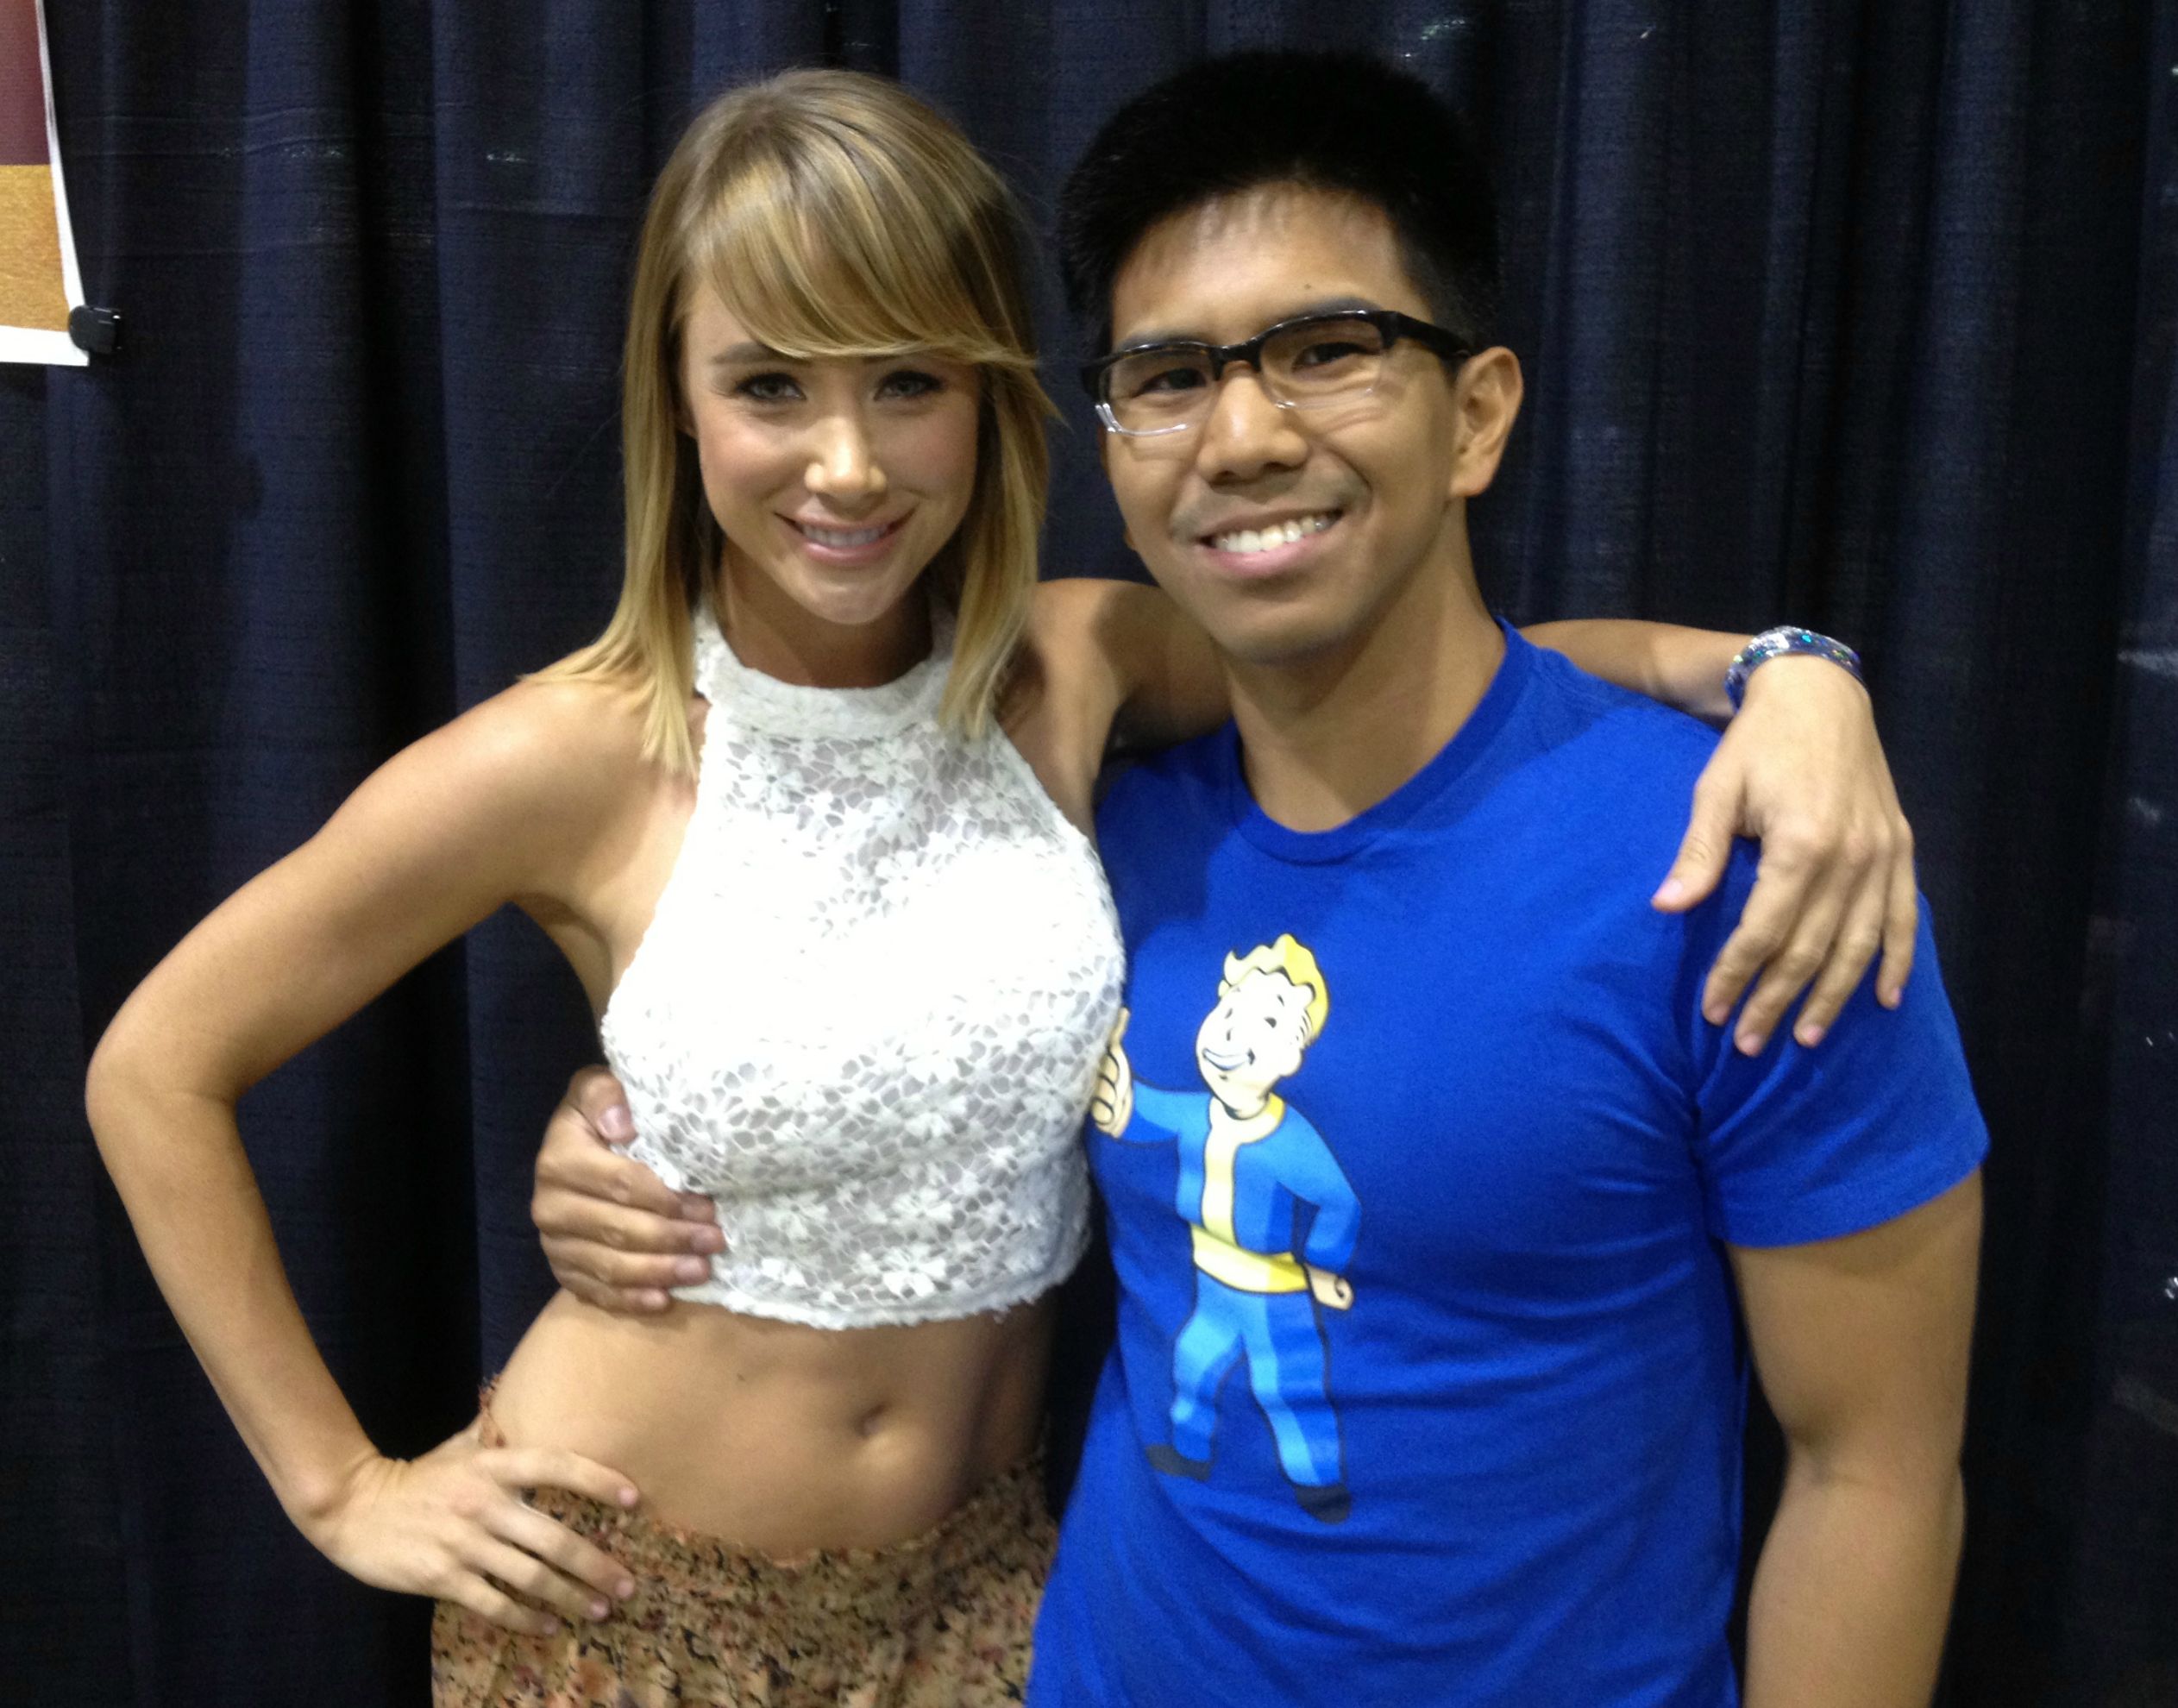 abdul imtiyaz recommends sara jean underwood pussy pic